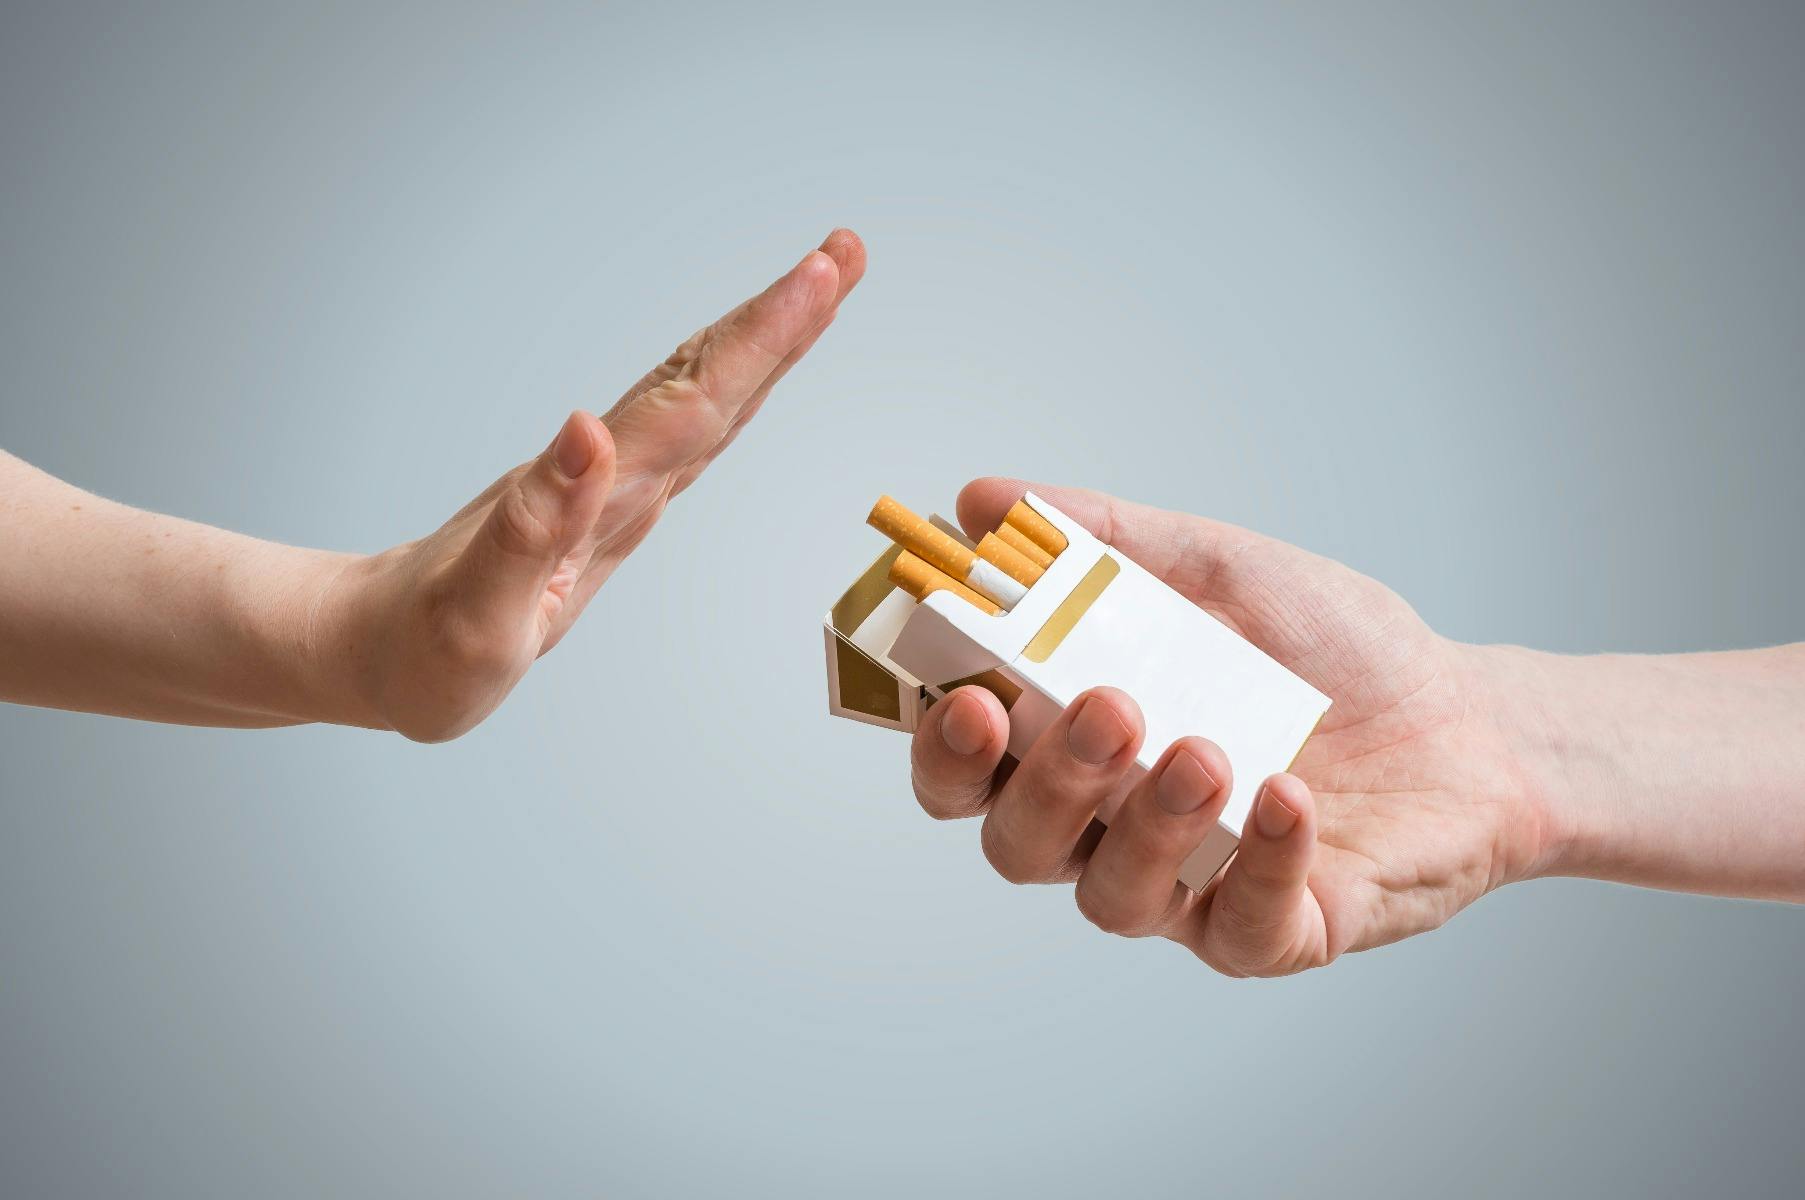 A hand rejecting a packet of cigarettes.